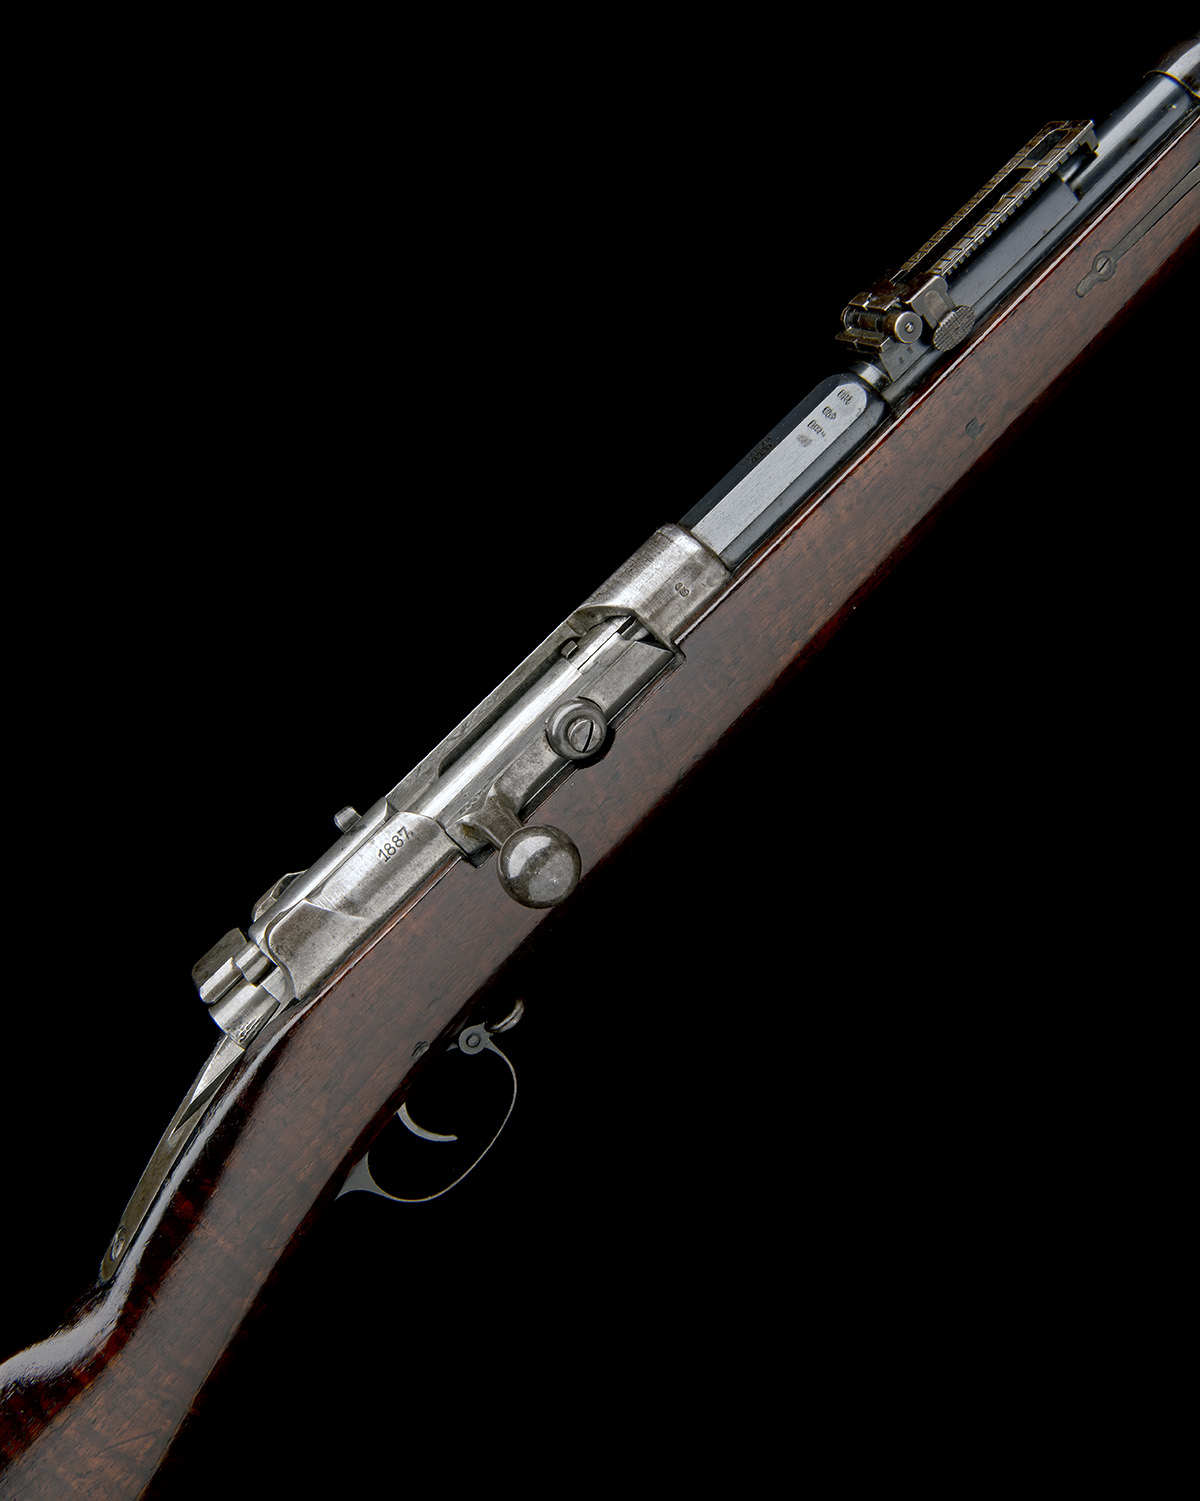 DANZIG ARSENAL, GERMANY AN 11mm (MAUSER COMMISSION) BOLT-ACTION REPEATING RIFLE MODEL 'MAUSER M71/